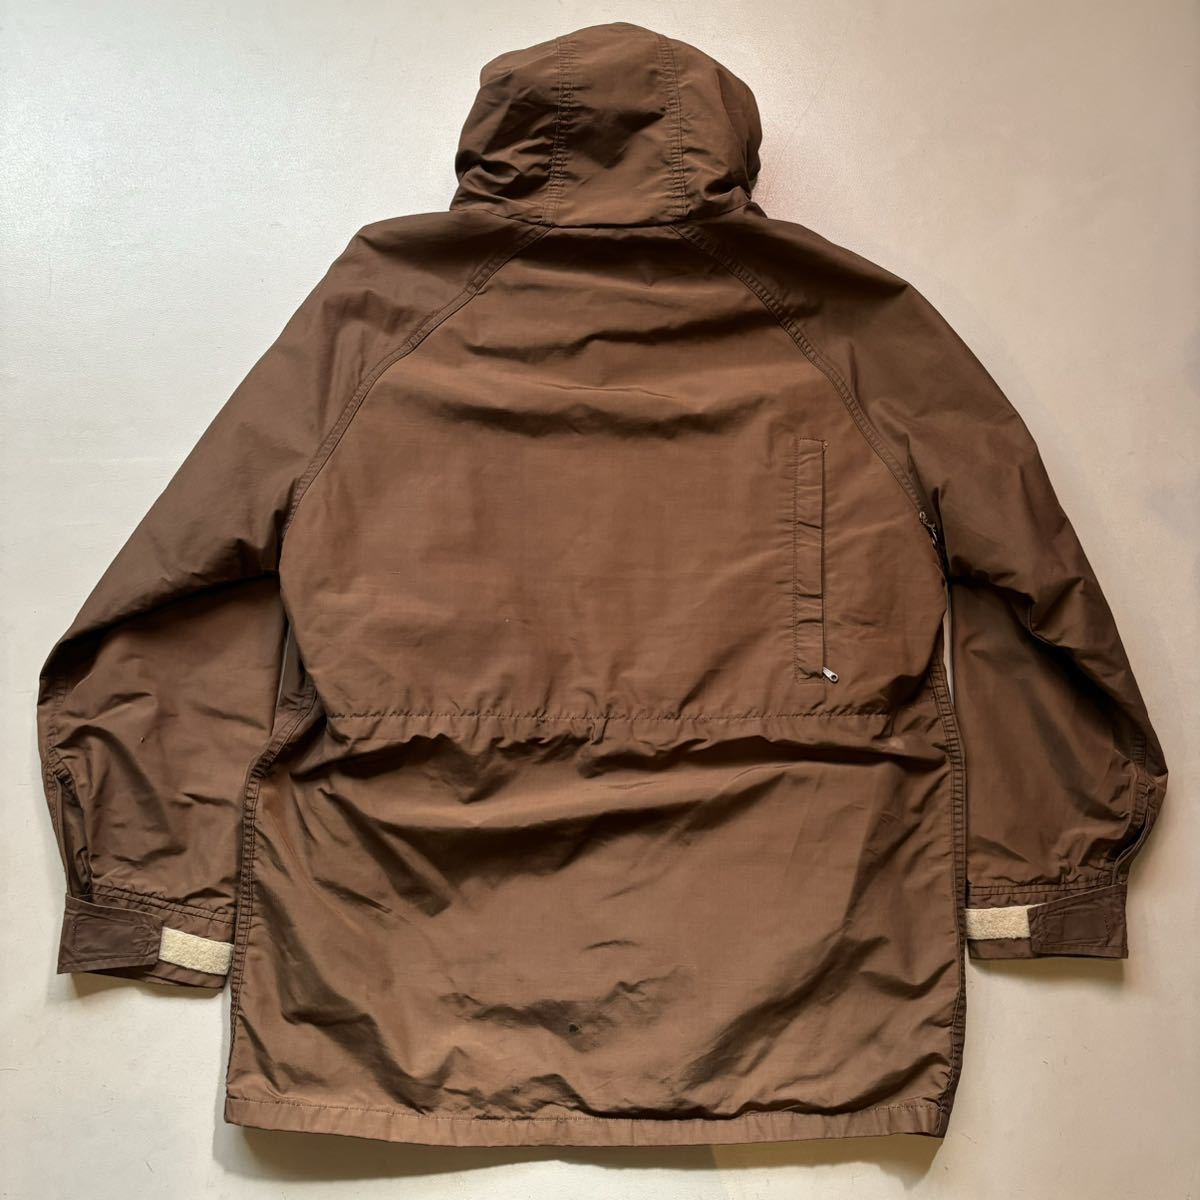 70s〜 Woolrich mountain parka “brown color” 70年代 ウールリッチ マウンテンパーカ 茶色_画像8